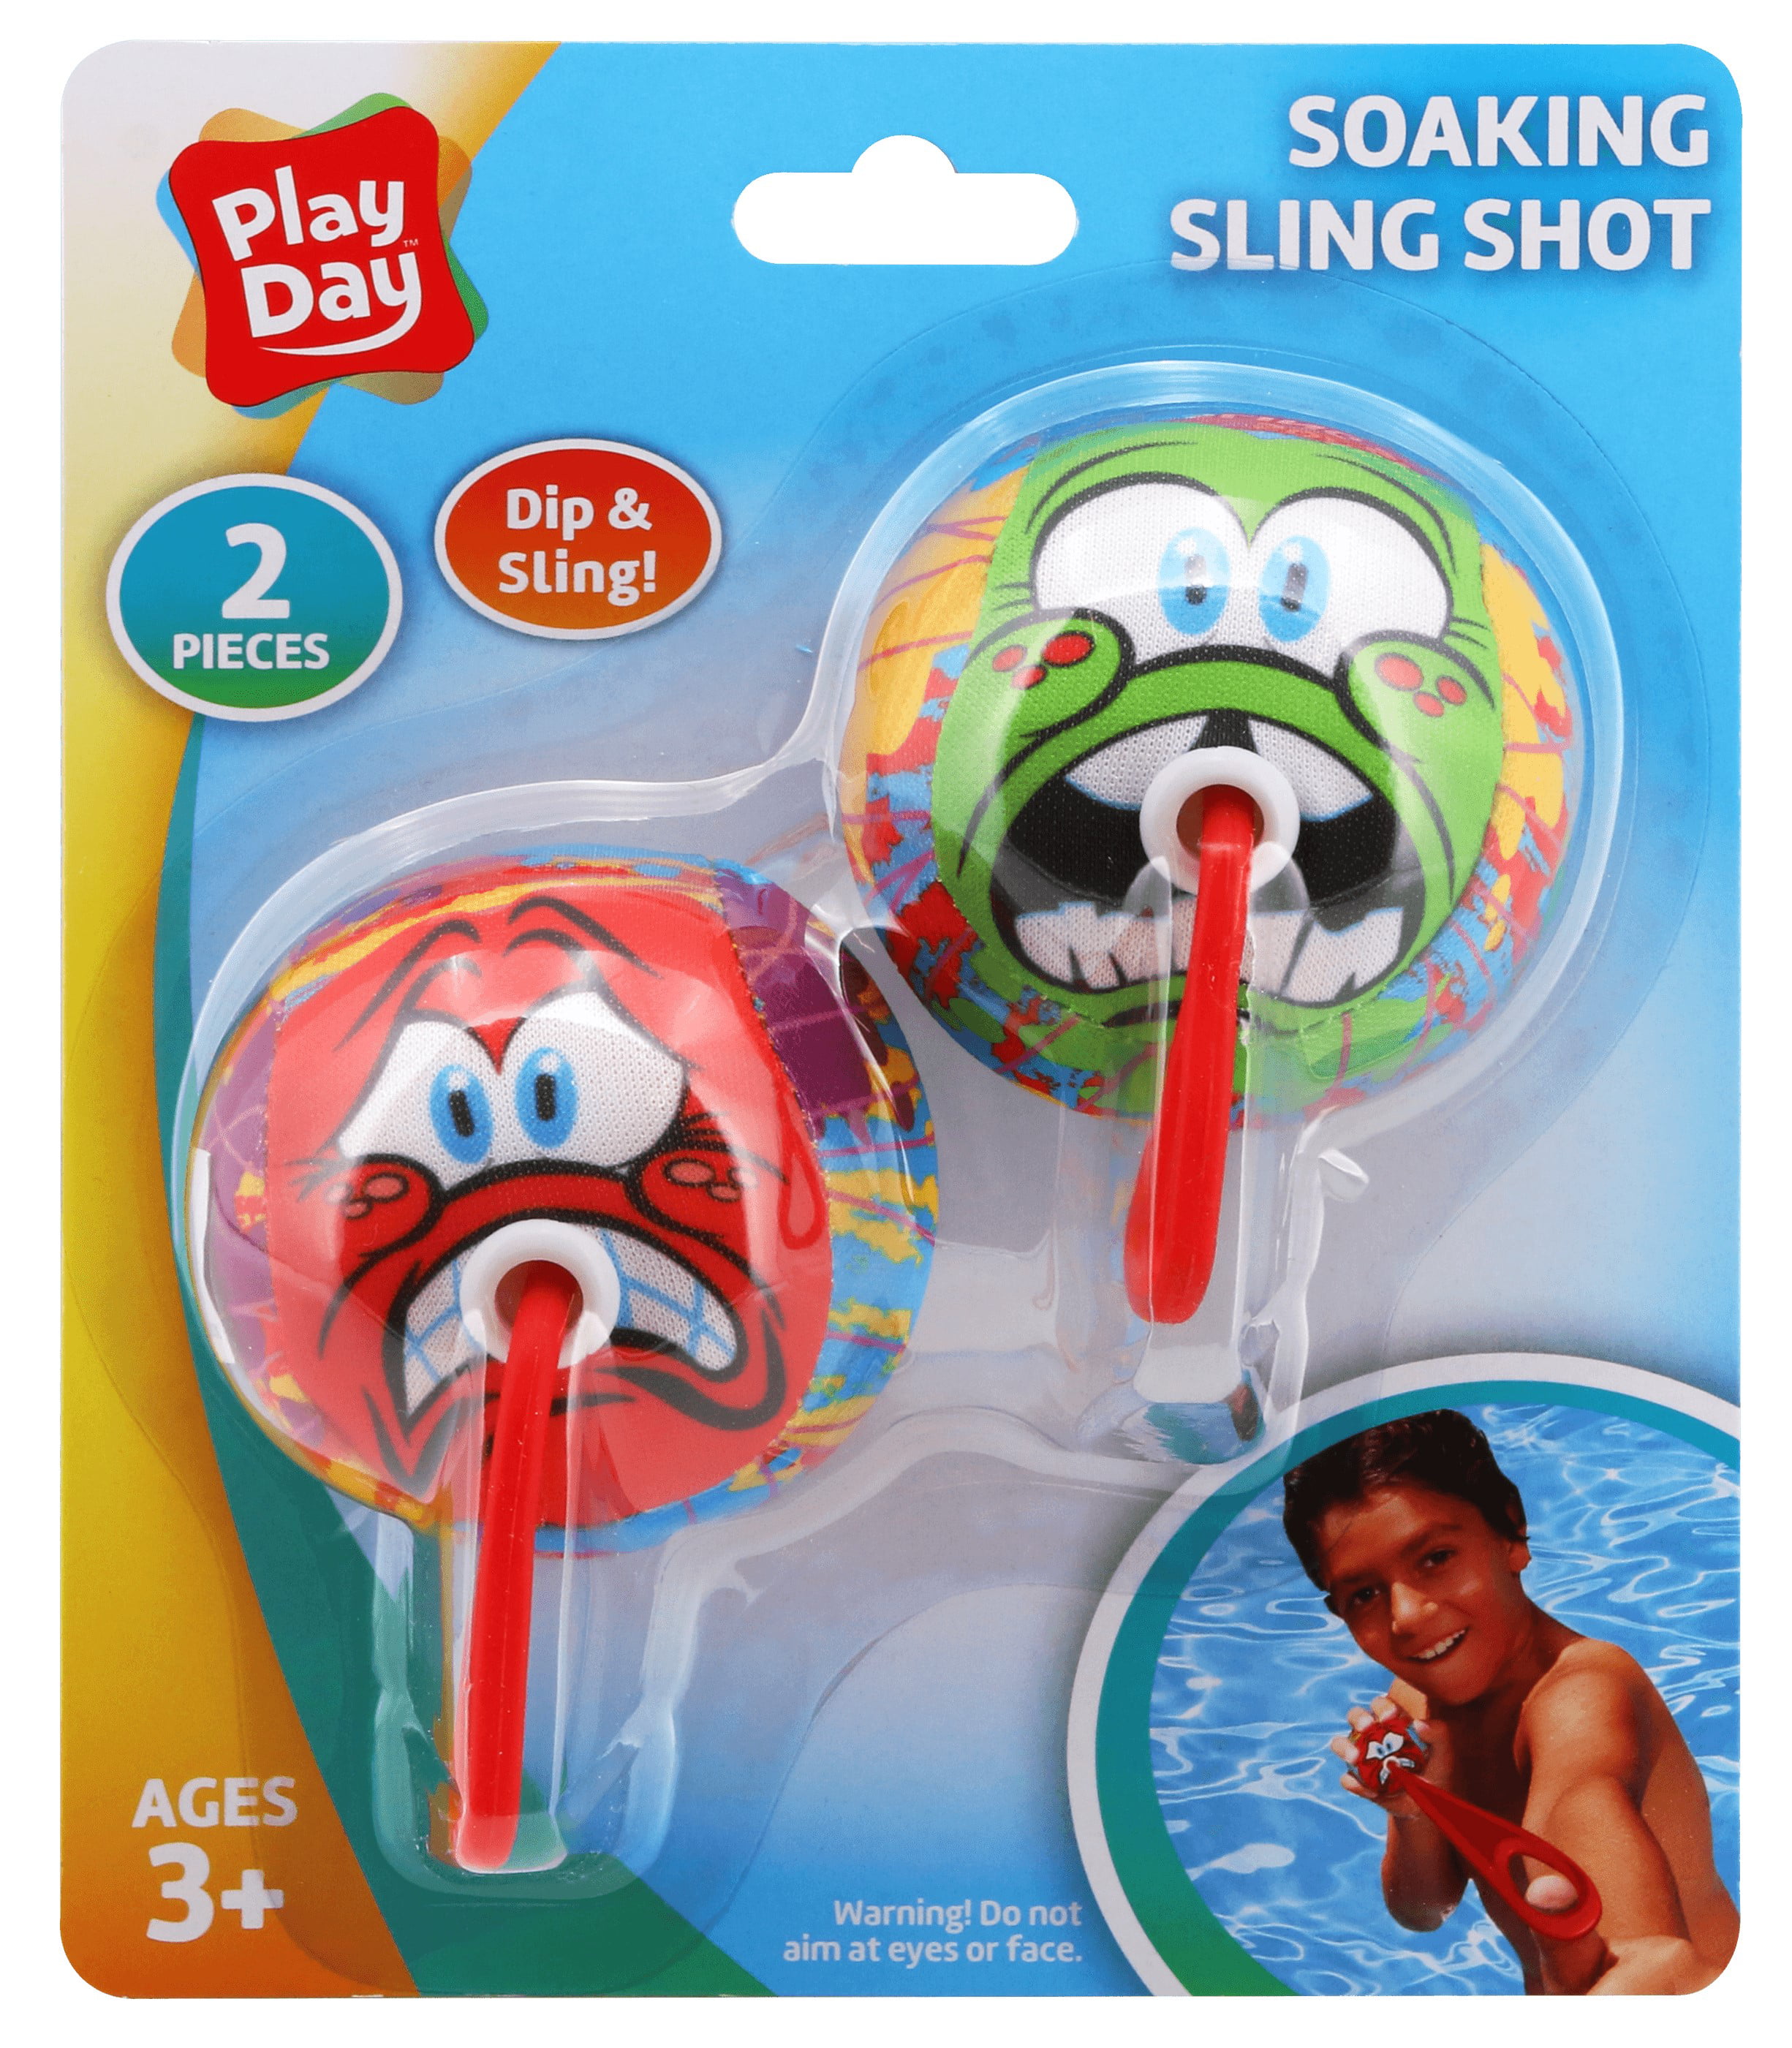 Play Day Soaking Sling Shot Pool Toy, Ages 3+, Unisex